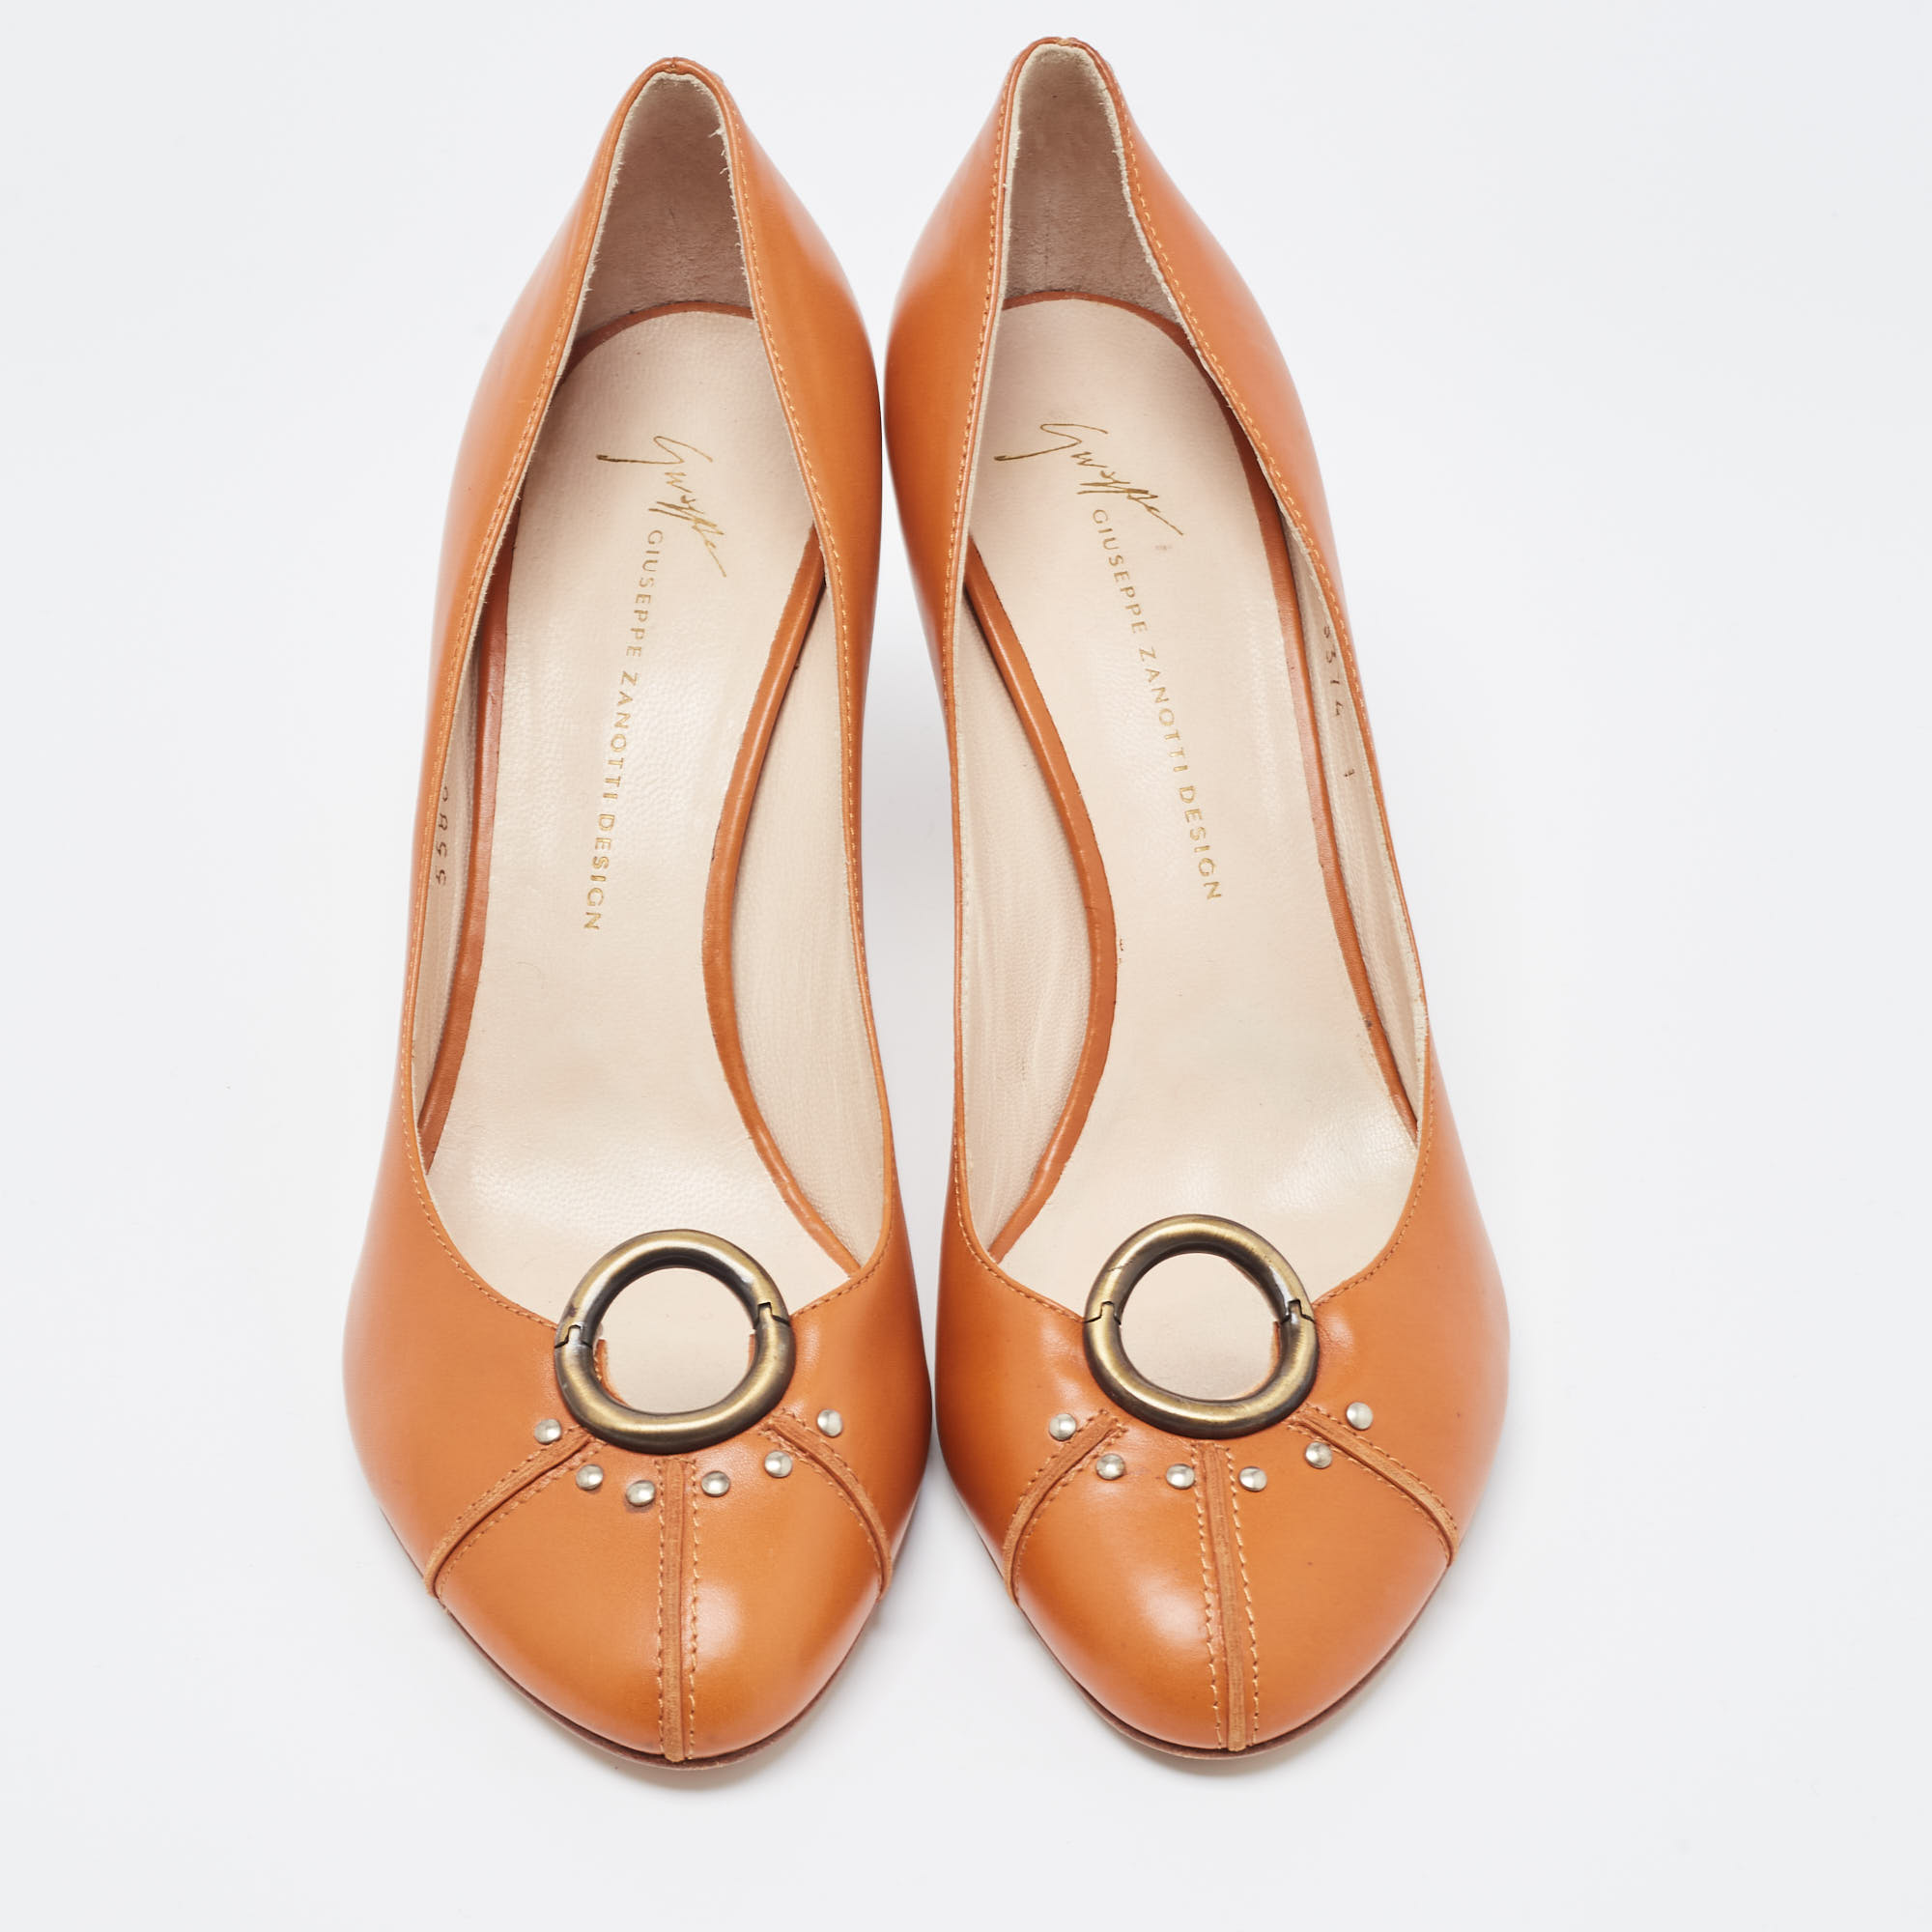 Giuseppe Zanotti Brown Leather Pointed Toe  Pumps Size 40